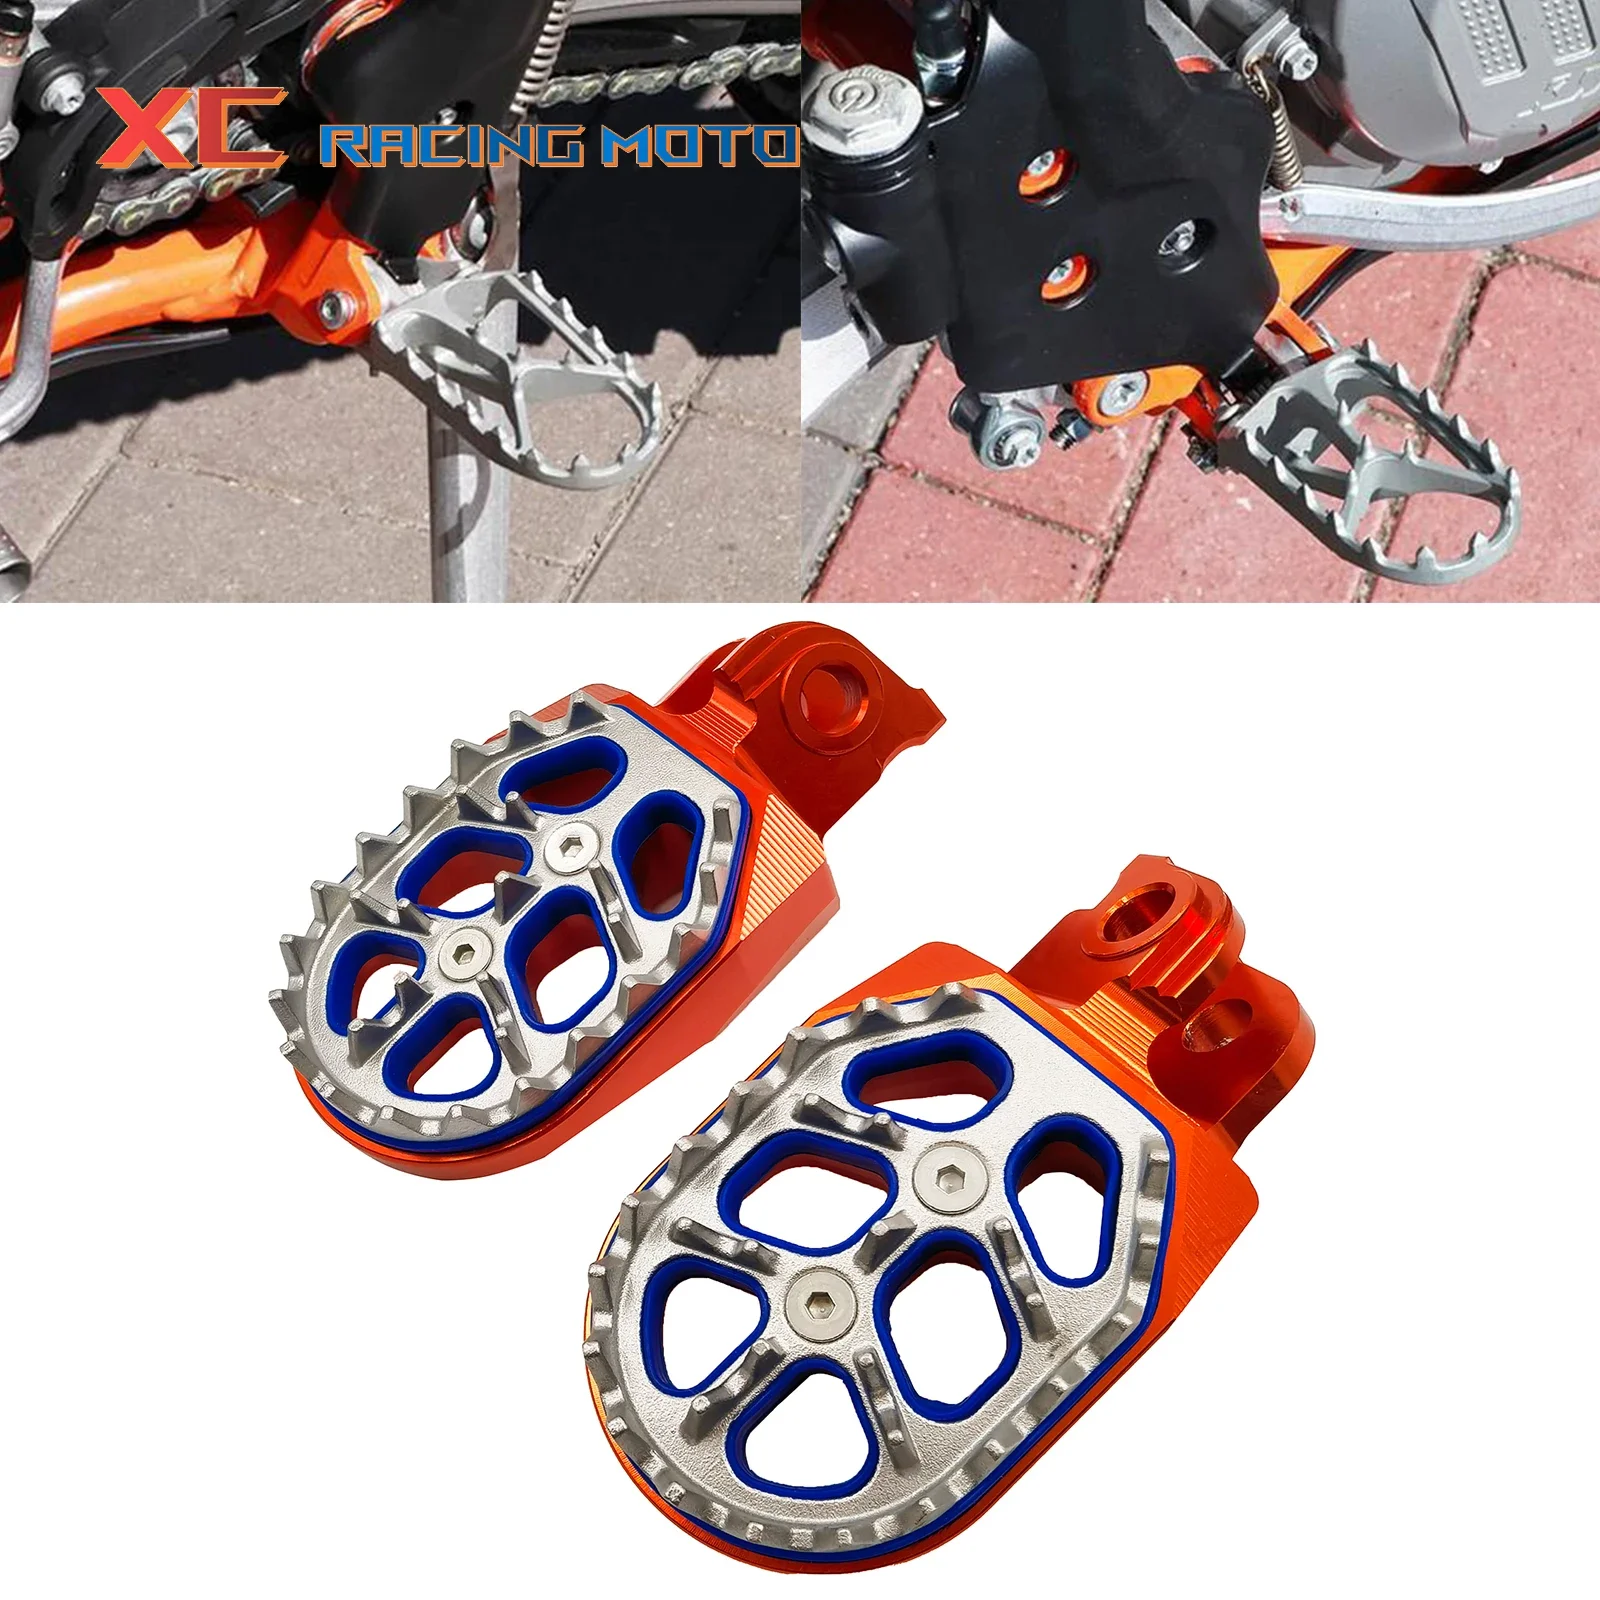 Otorcycle cnc footpeg foot pegs pedal spikes footrest for ktm husqvarna sx sx f exc exc thumb200